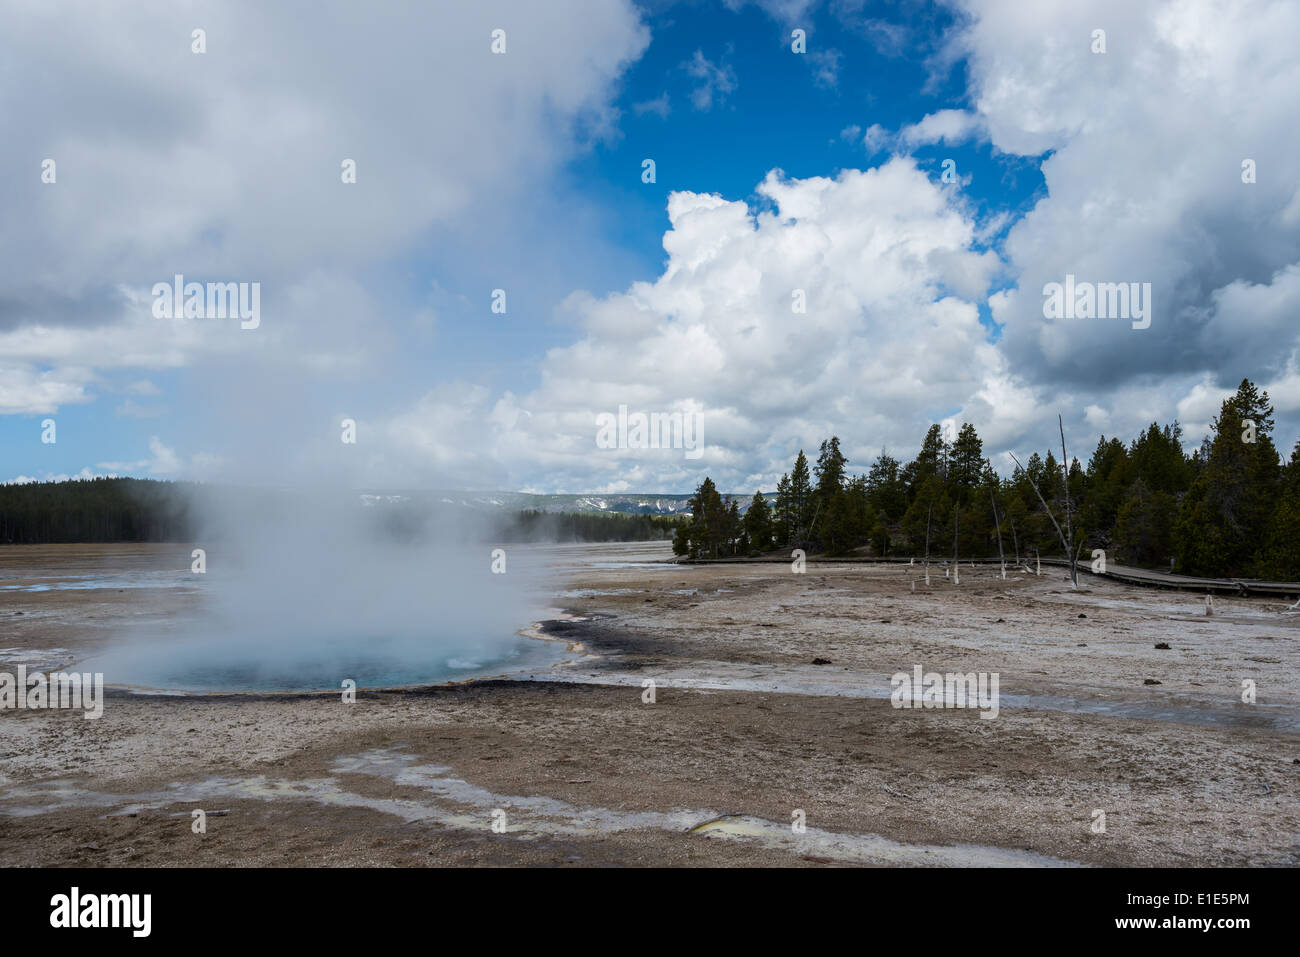 A hot spring. Yellowstone National Park, Wyoming, USA. Stock Photo